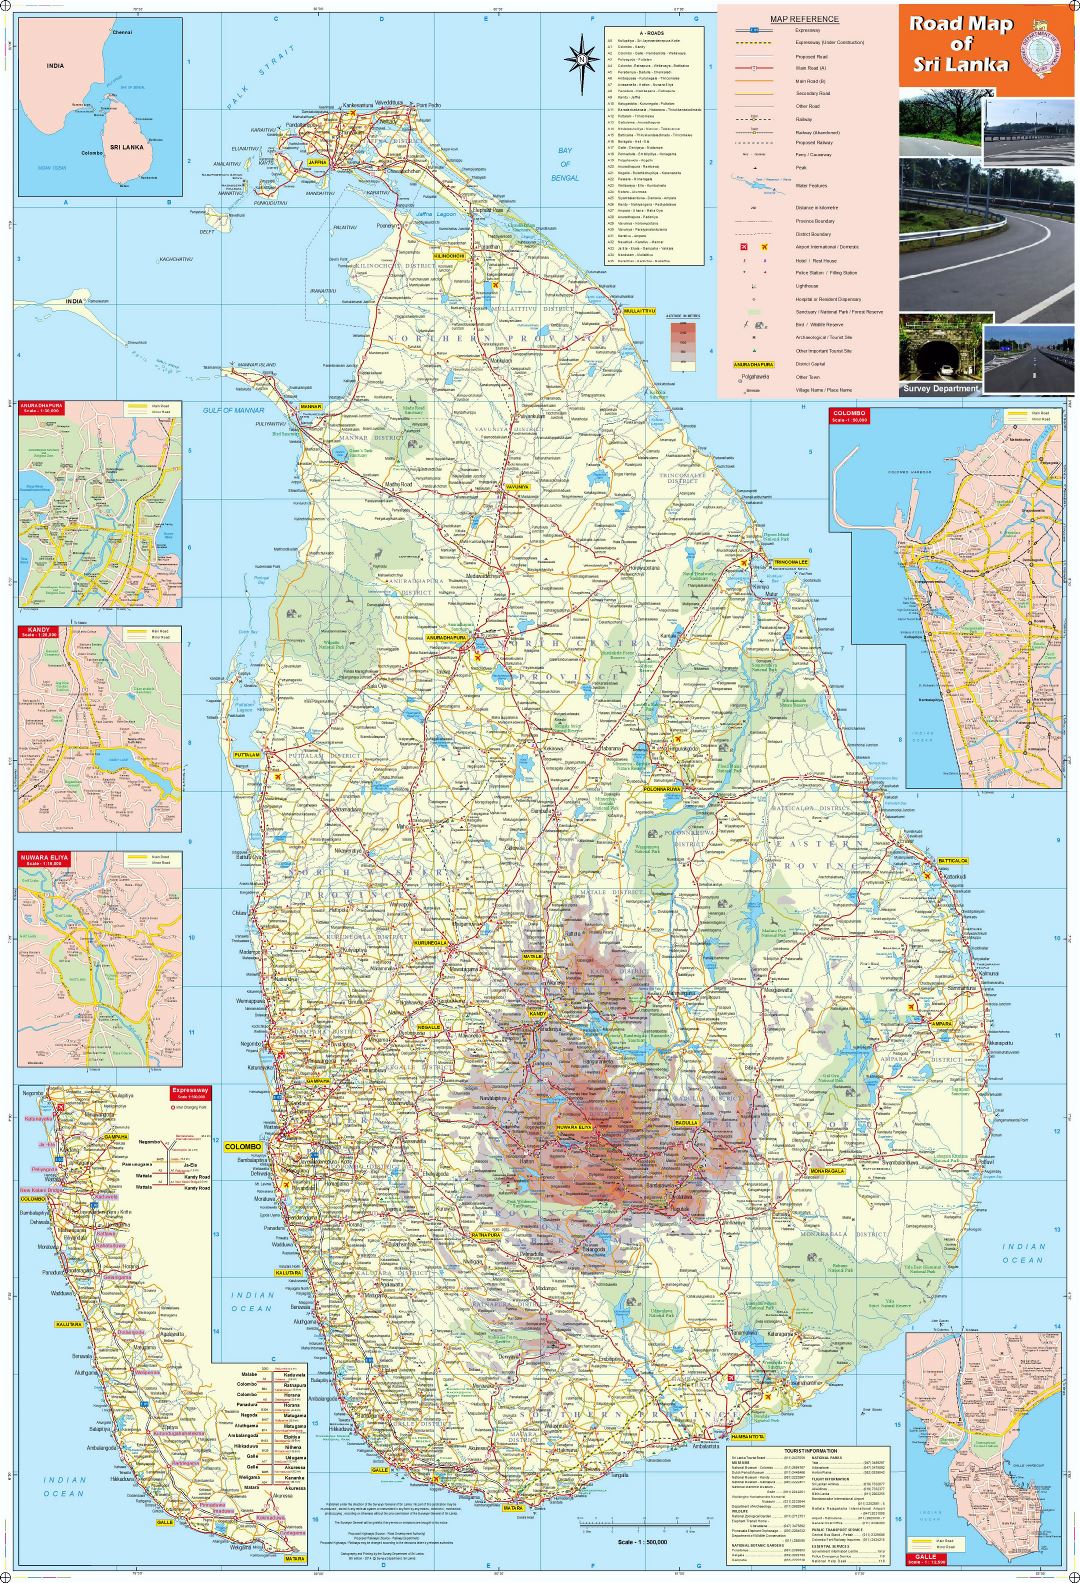 Large detailed map of Sri Lanka with all cities, roads, railroads, airpors and other marks